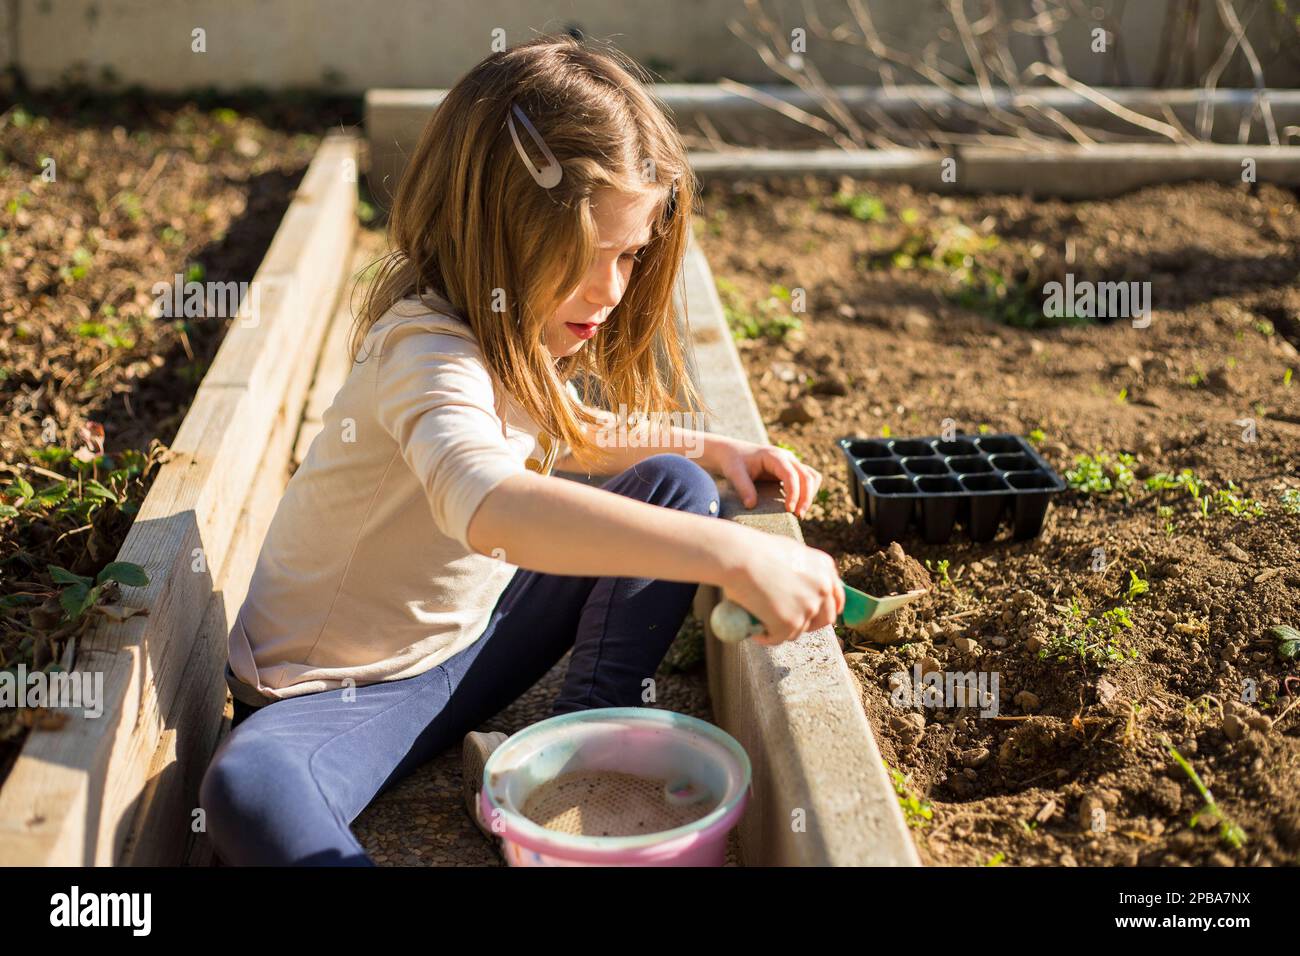 caucasian child girl gardening and preparing soil with a sieve using a shovel. Environmental education idea. Stock Photo